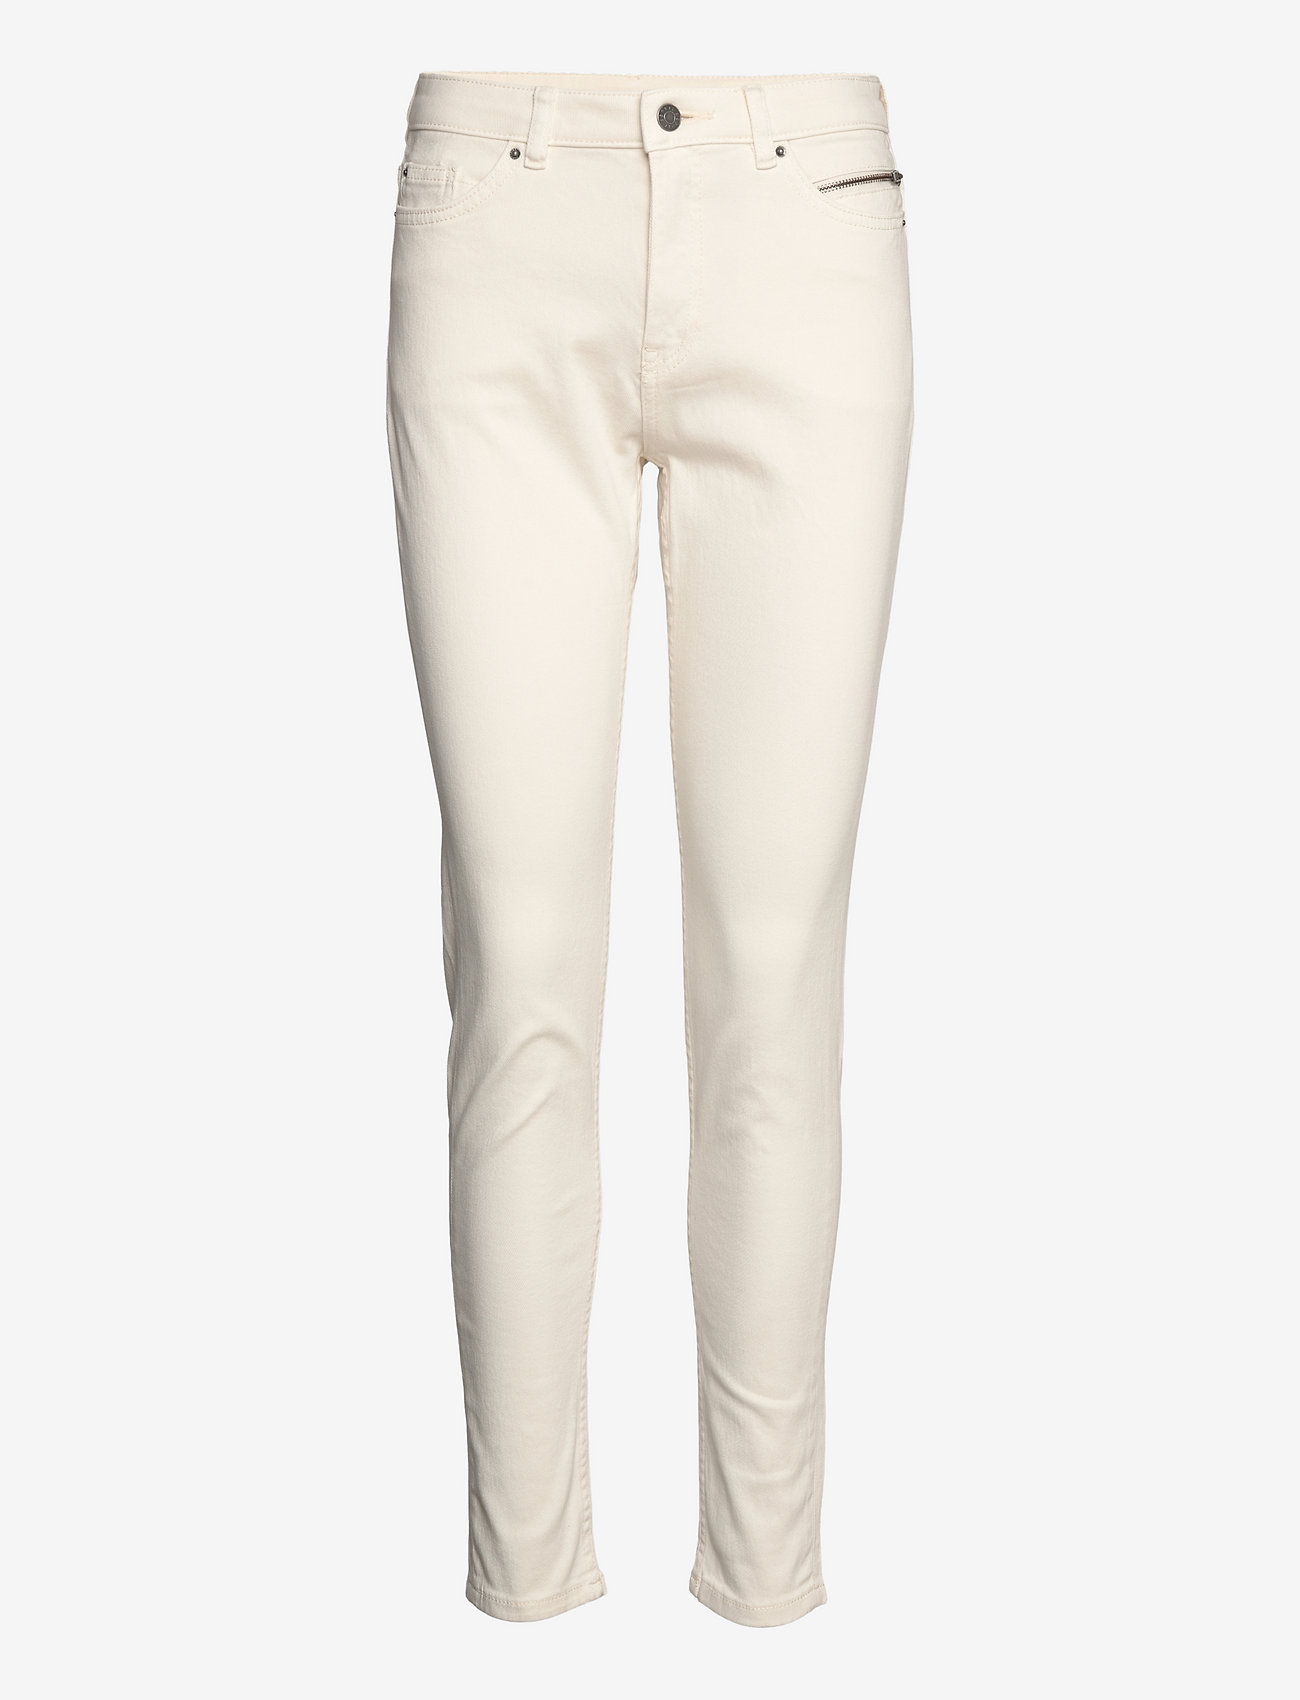 Esprit Casual - Stretch trousers with zip detail - slim fit jeans - off white - 0